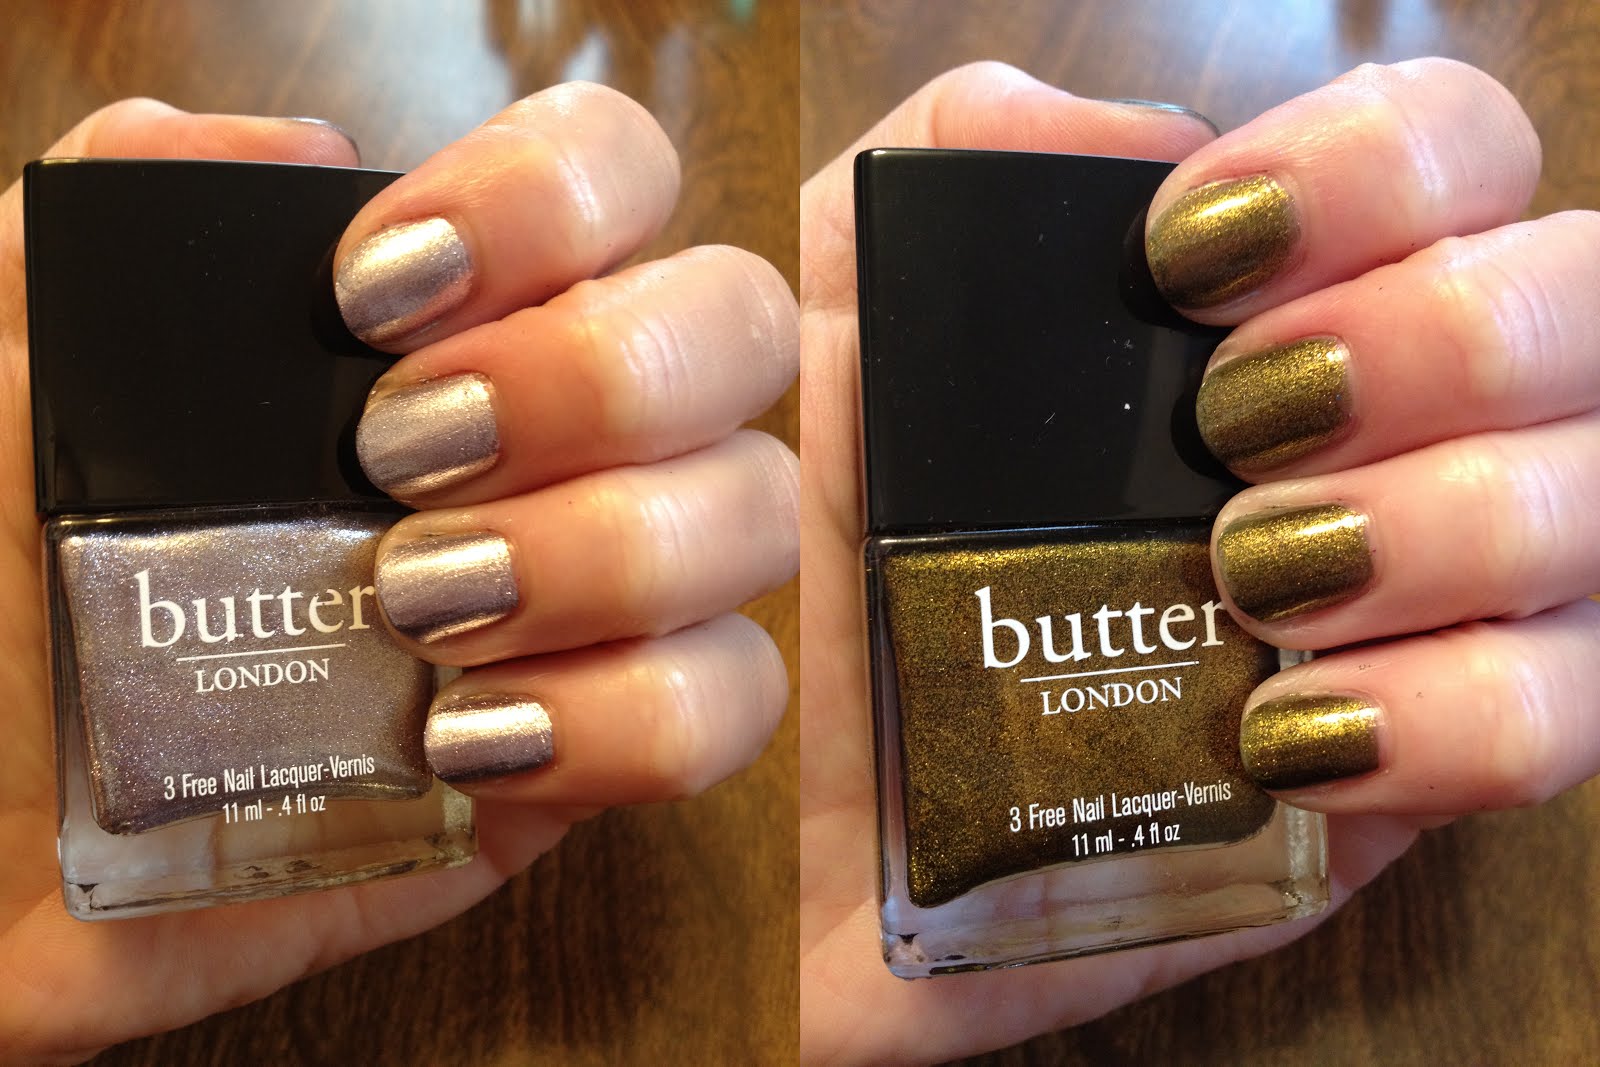 4. "Gingerbread Mani" Nail Polish Set by Butter London - wide 9